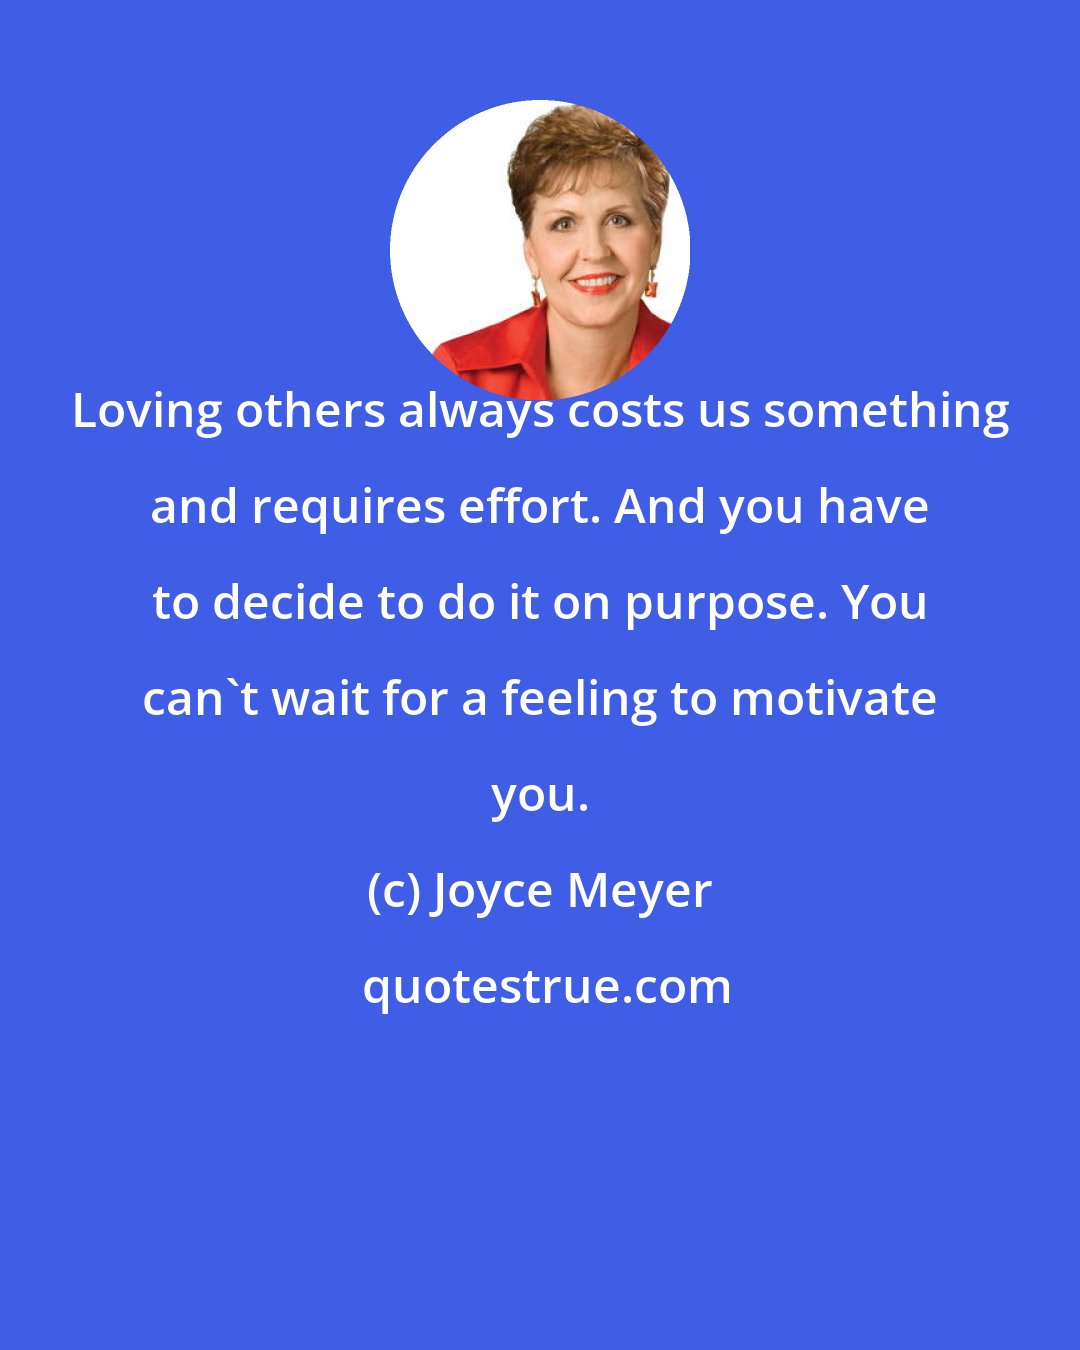 Joyce Meyer: Loving others always costs us something and requires effort. And you have to decide to do it on purpose. You can't wait for a feeling to motivate you.